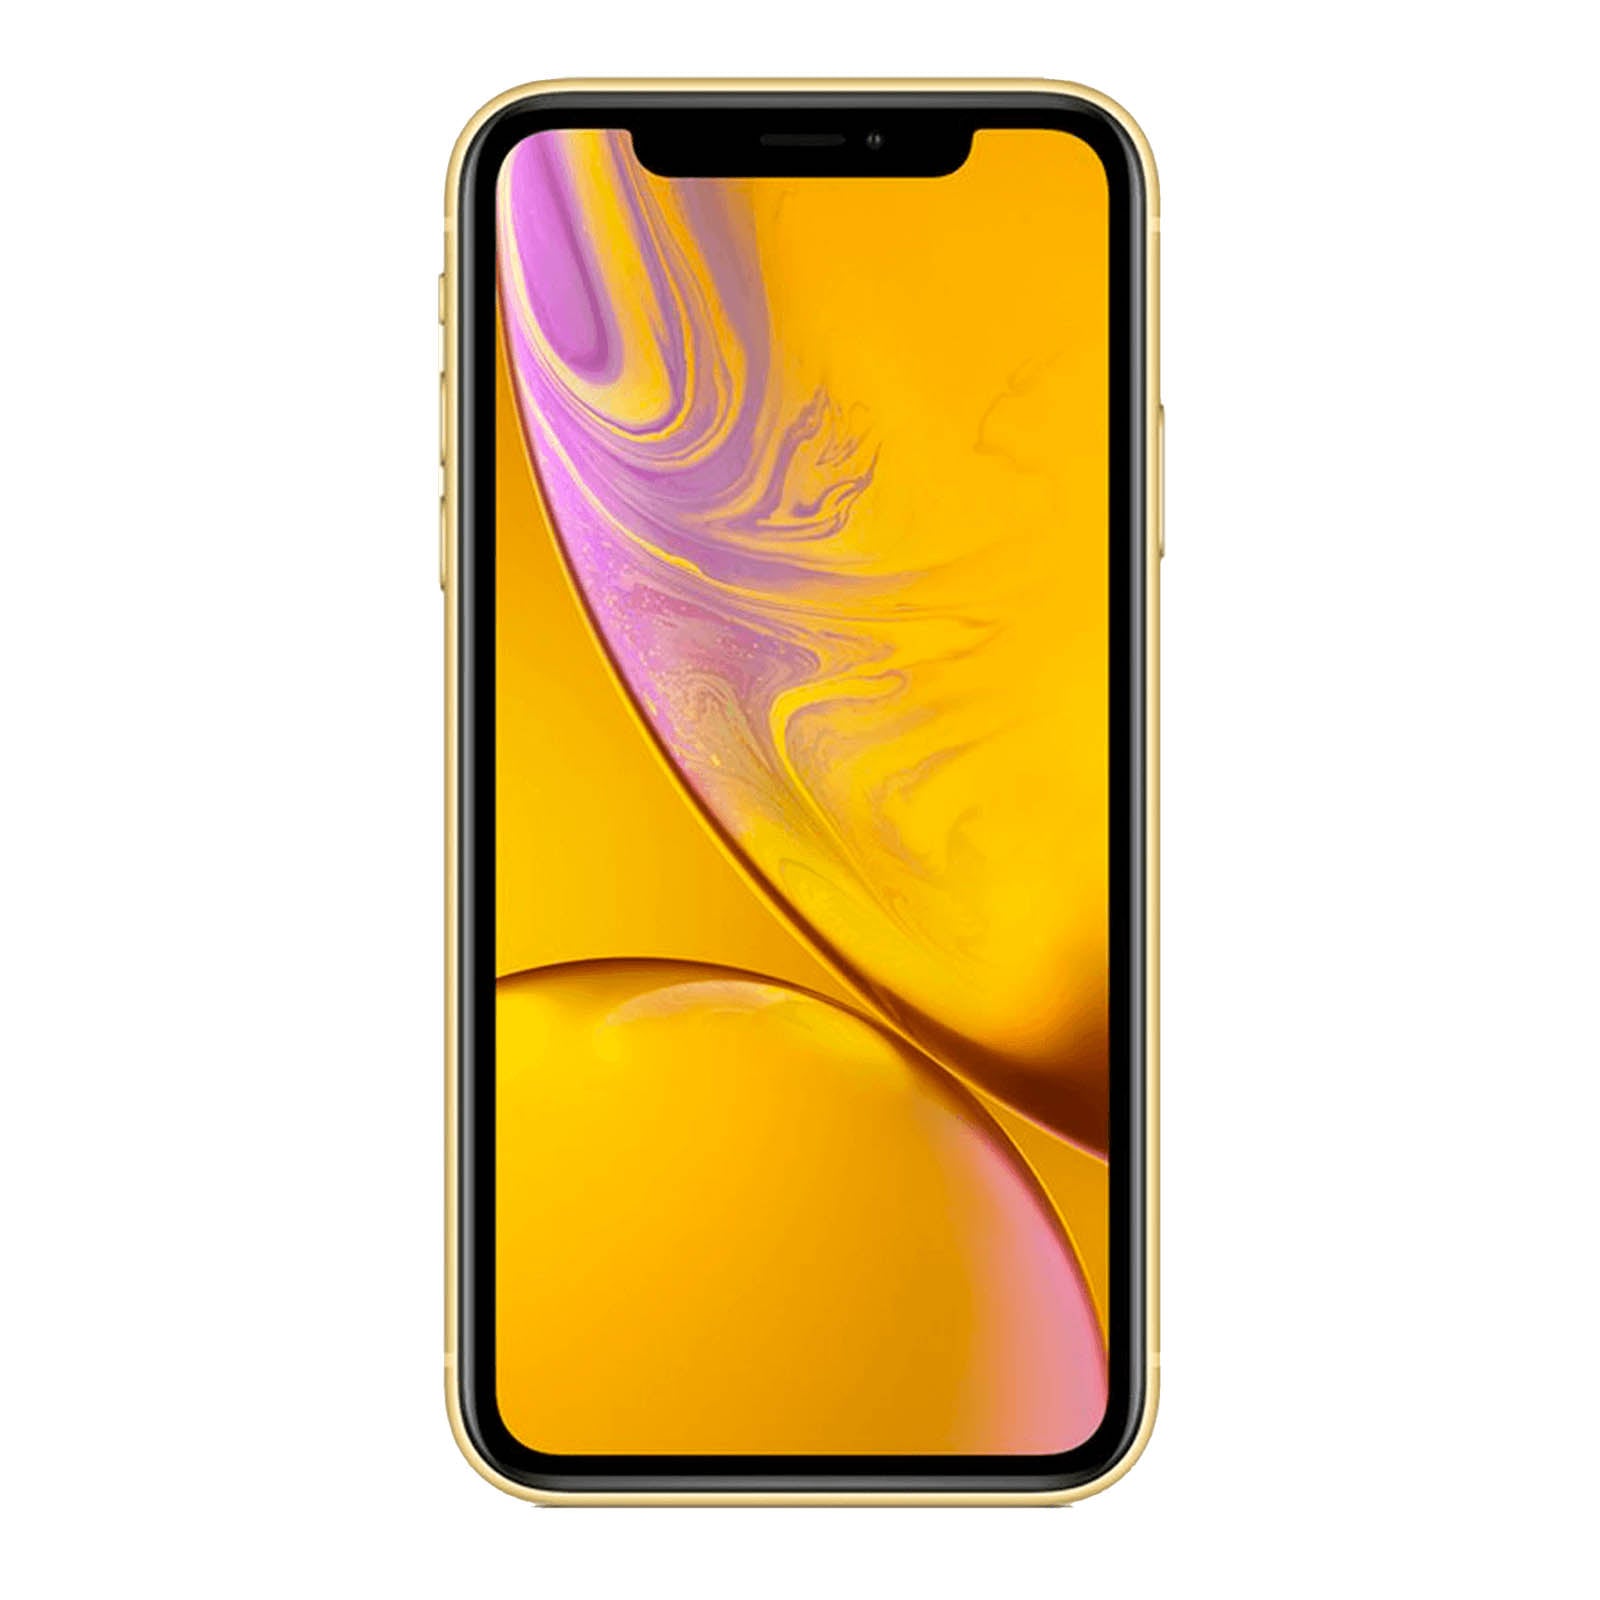 Apple iPhone XR 64GB Yellow Very Good - AT&T